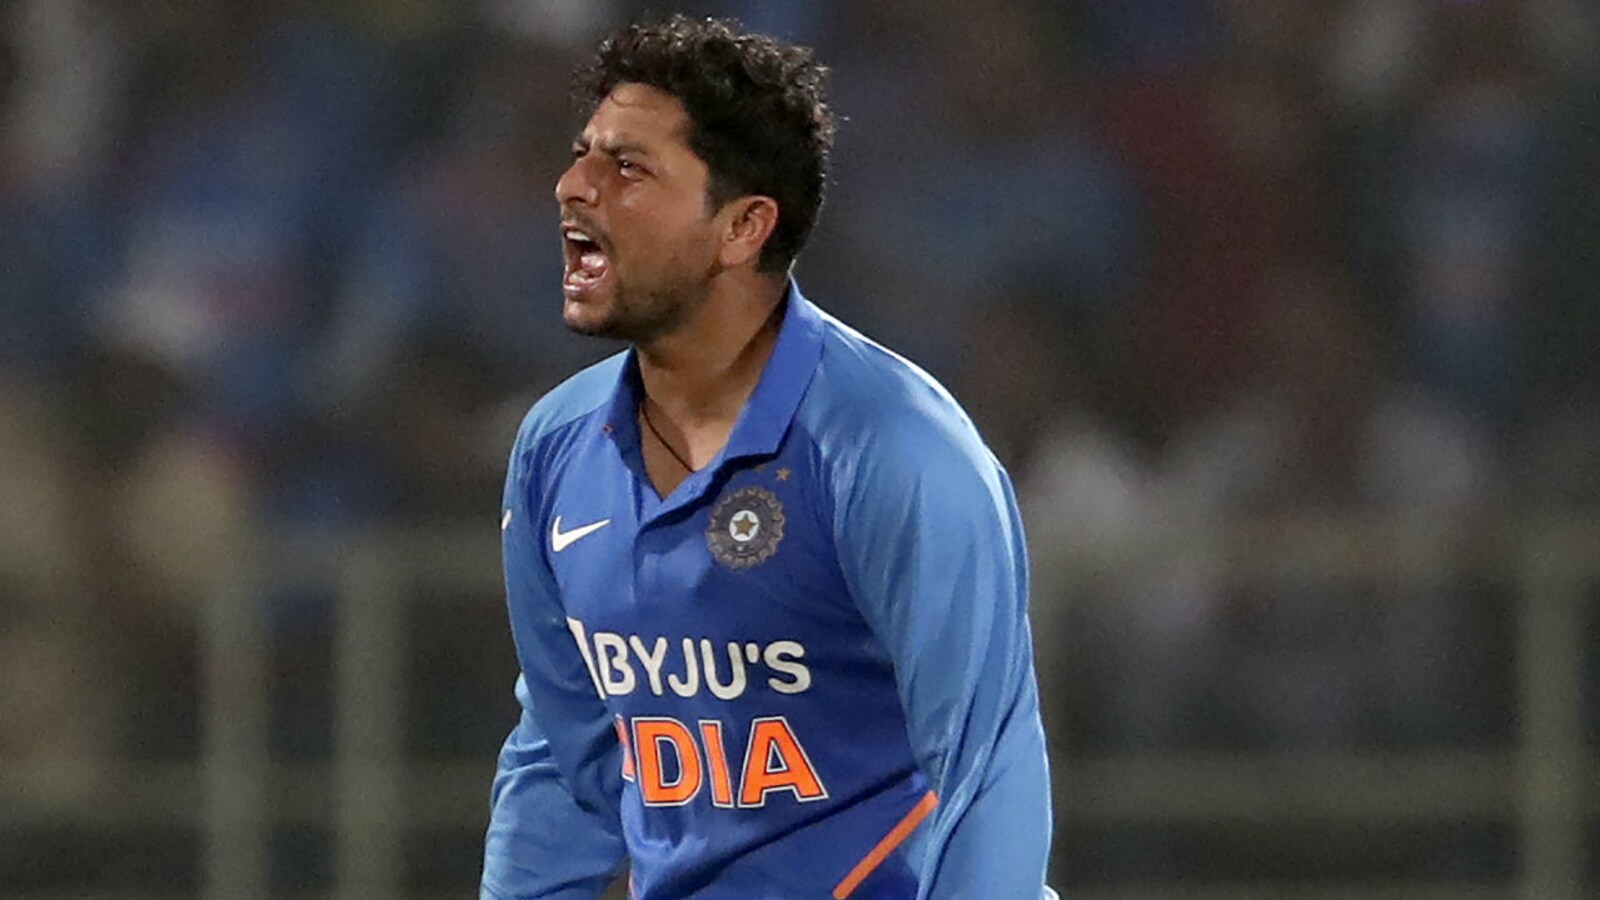 After a tough 2019, Kuldeep Yadav says he will try to plan better for every  game in 2020